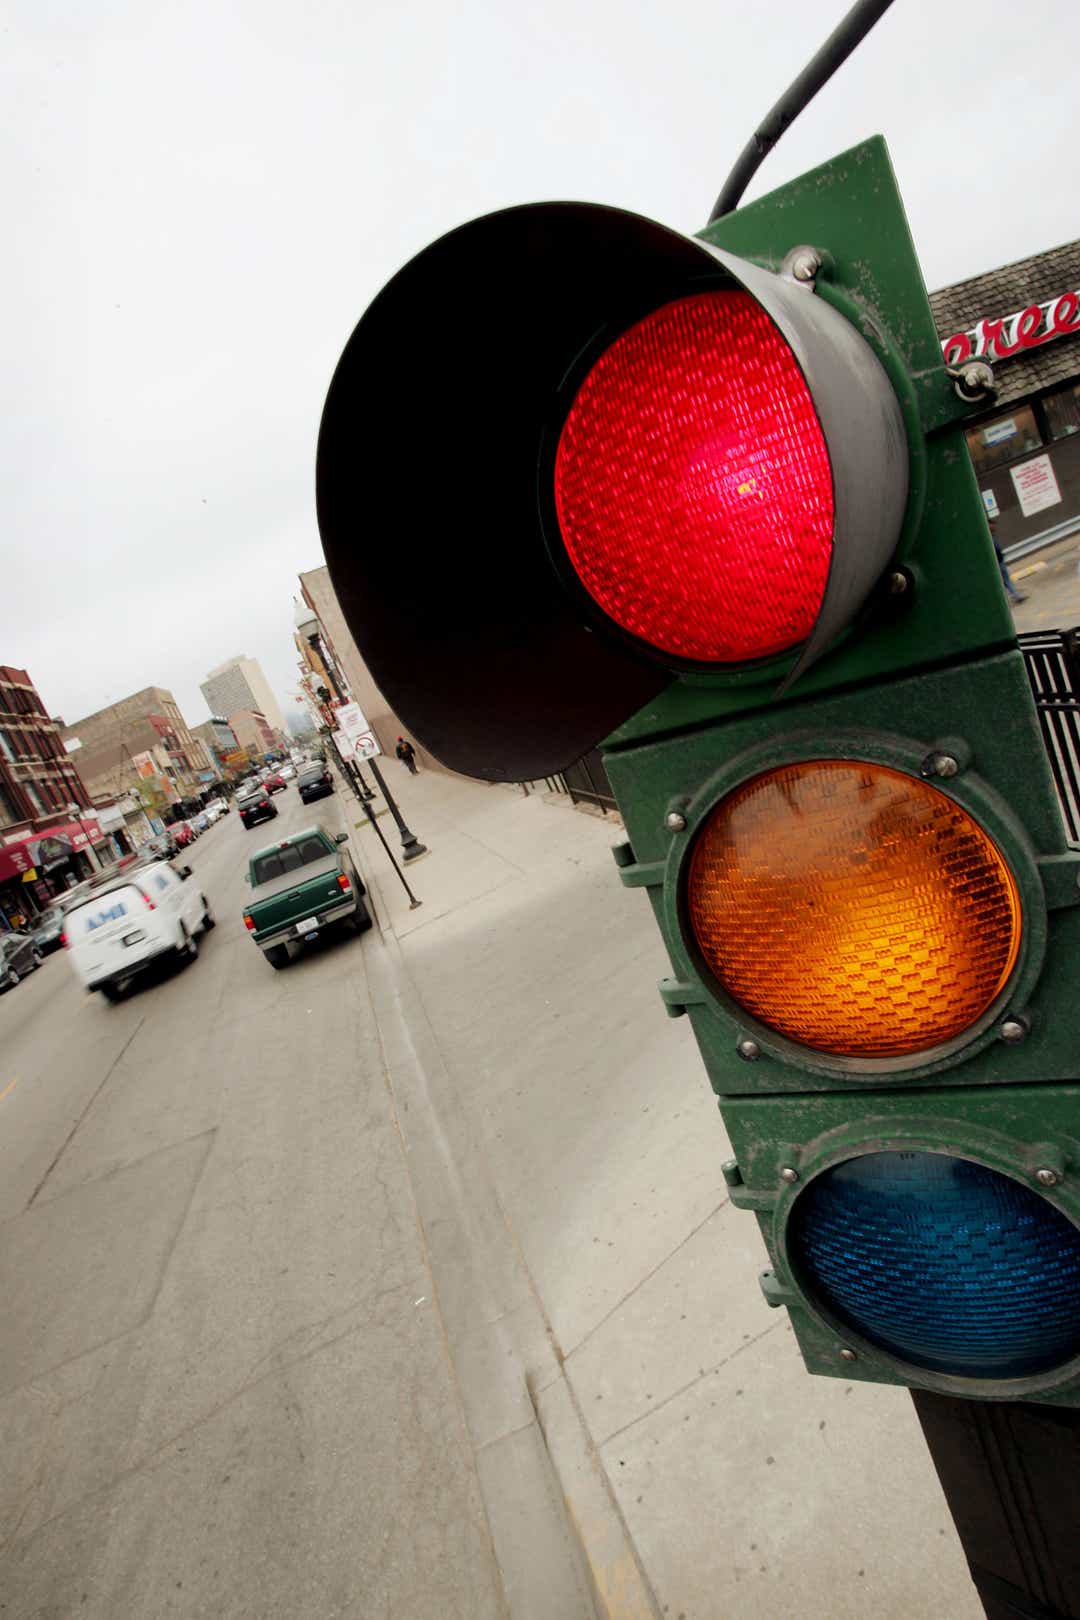 Traffic deaths due to red-light running hit 10-year high, AAA finds